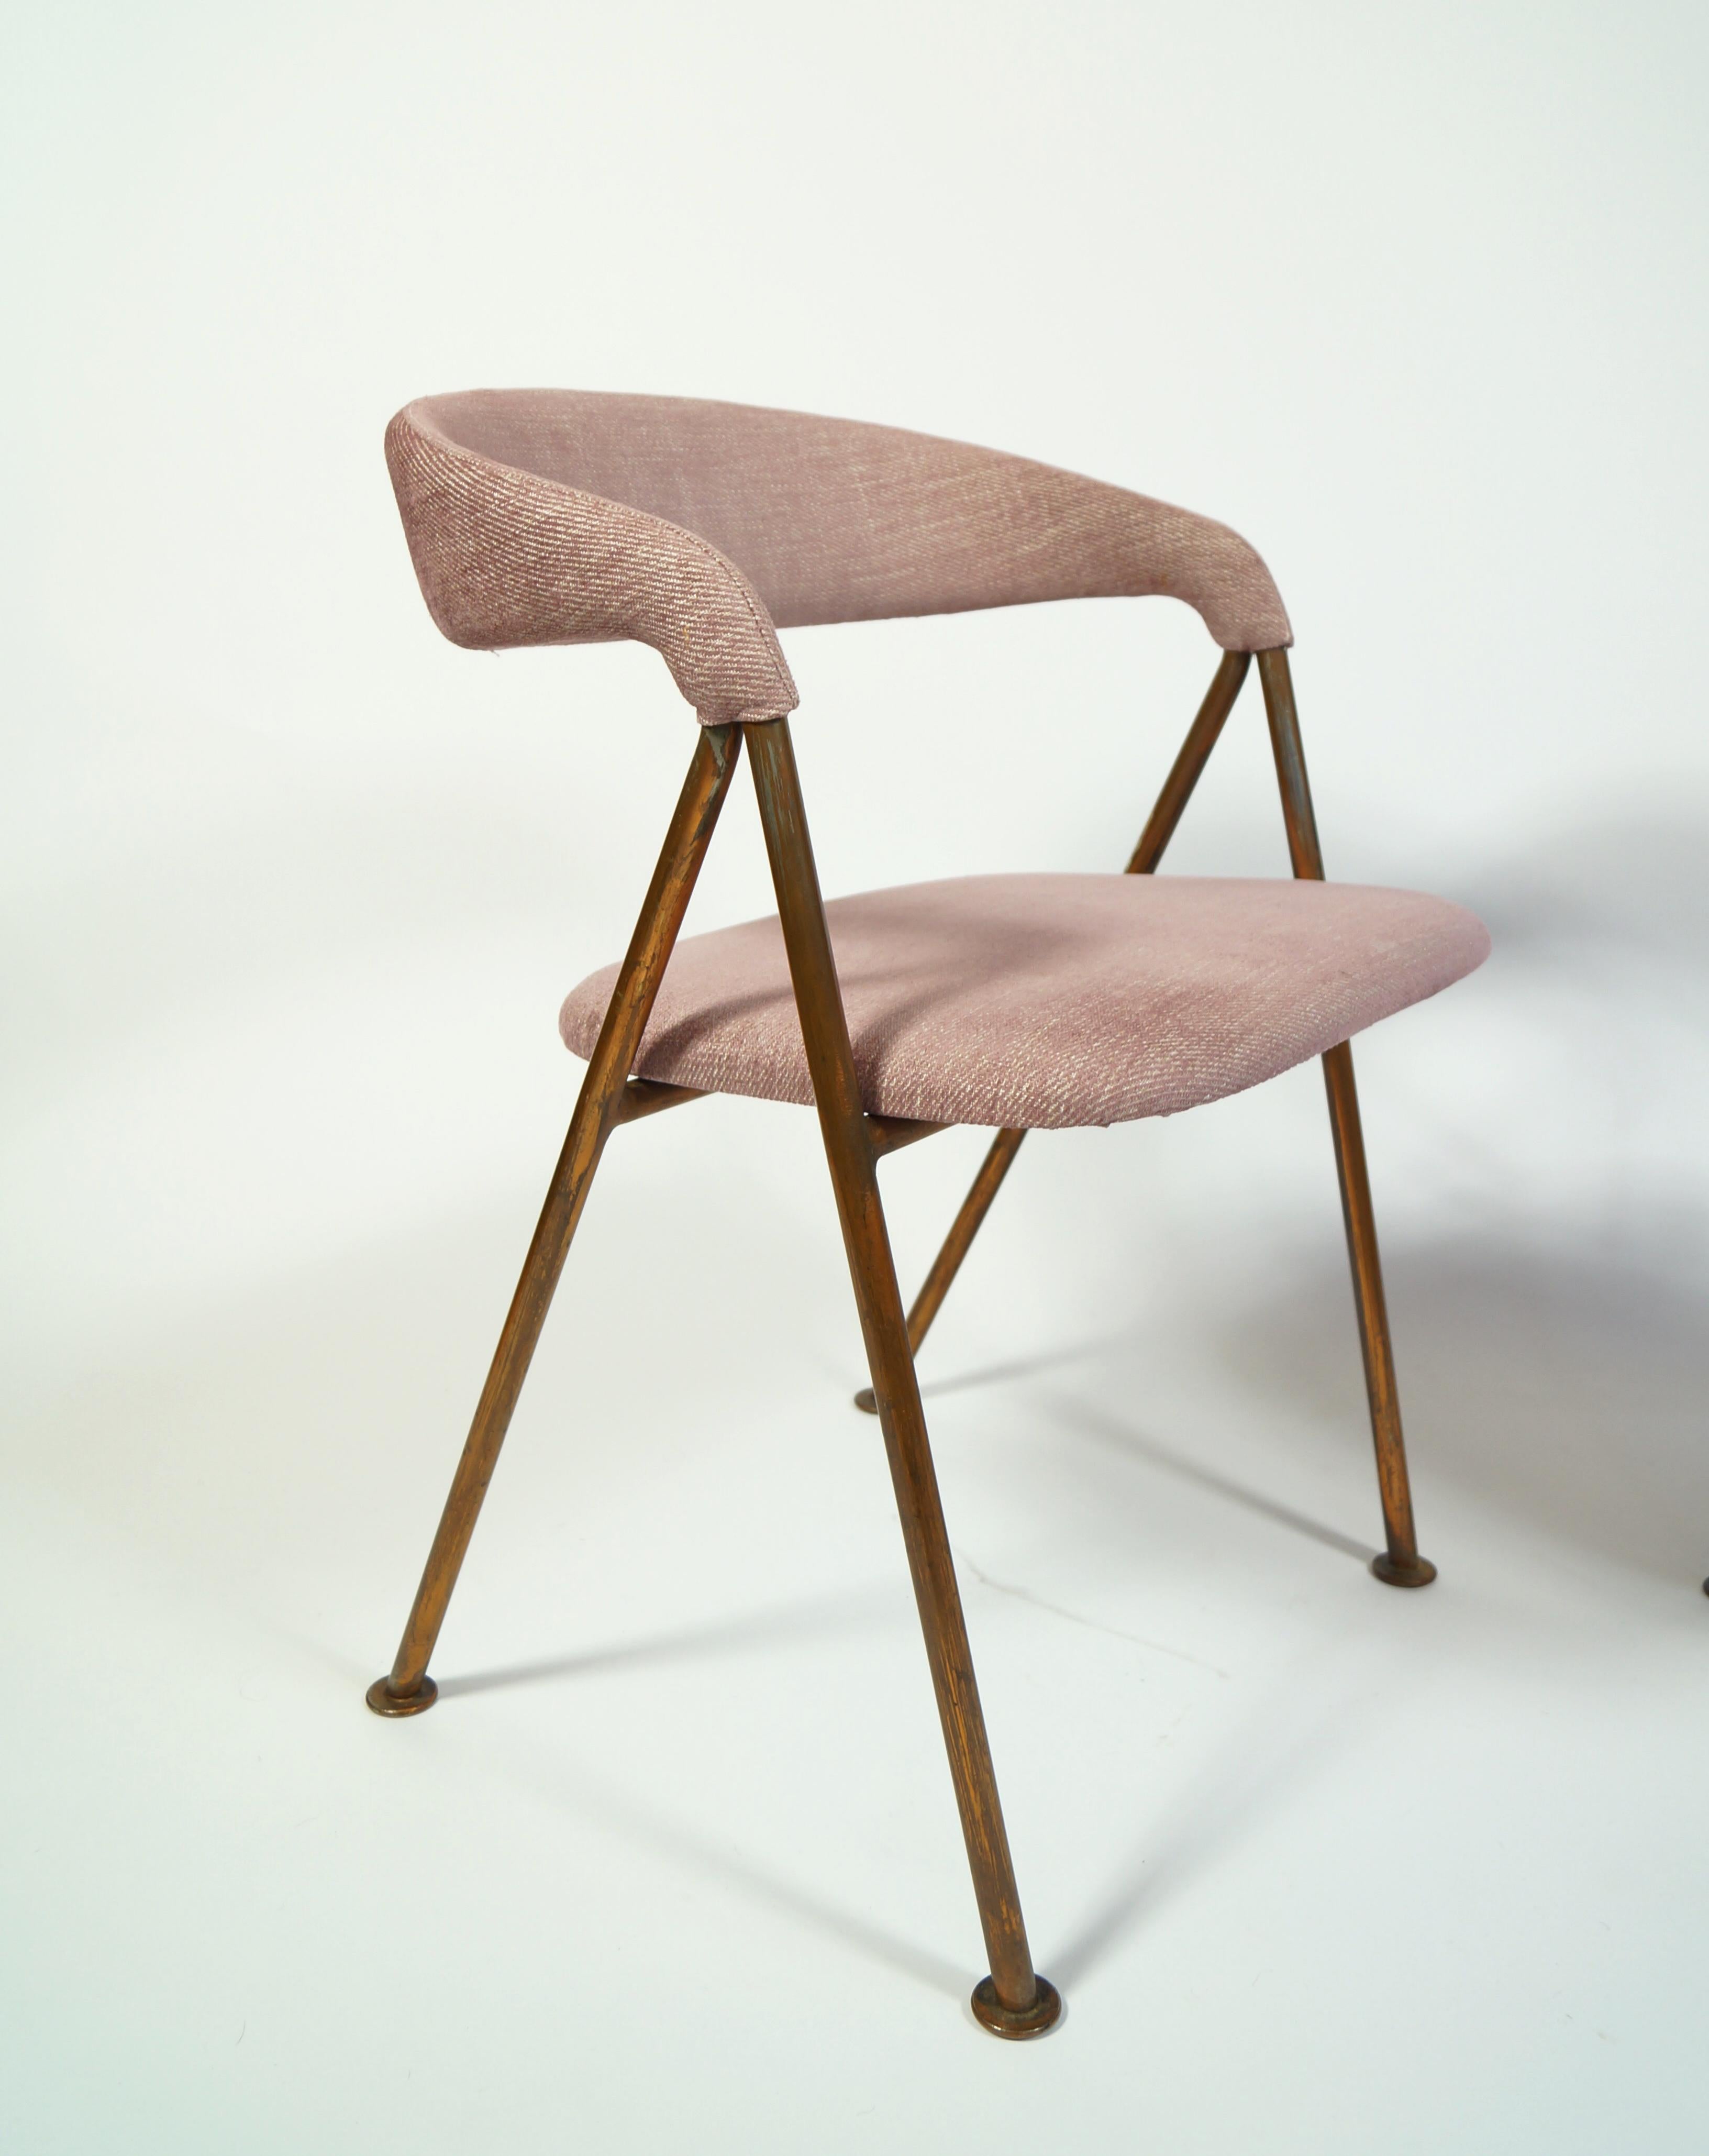 1950s Chairs by Maija-Liisa Komulainen In Good Condition For Sale In Helsinki, FI